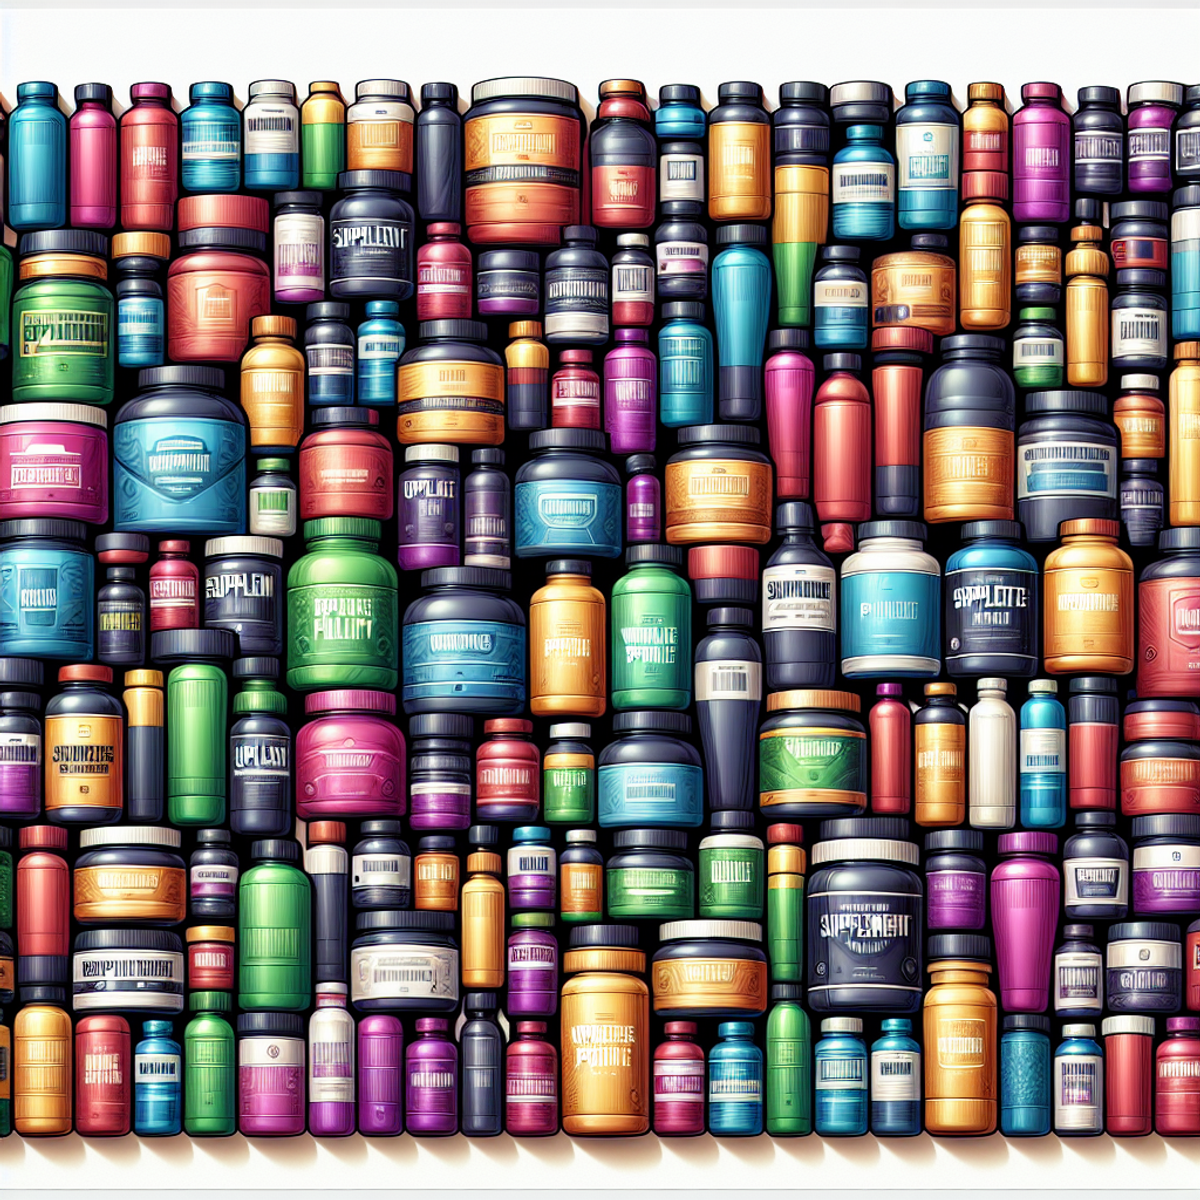 A close-up view of an array of colorful supplement bottles arranged neatly, representing a diverse selection of products in the wholesale supplement market.